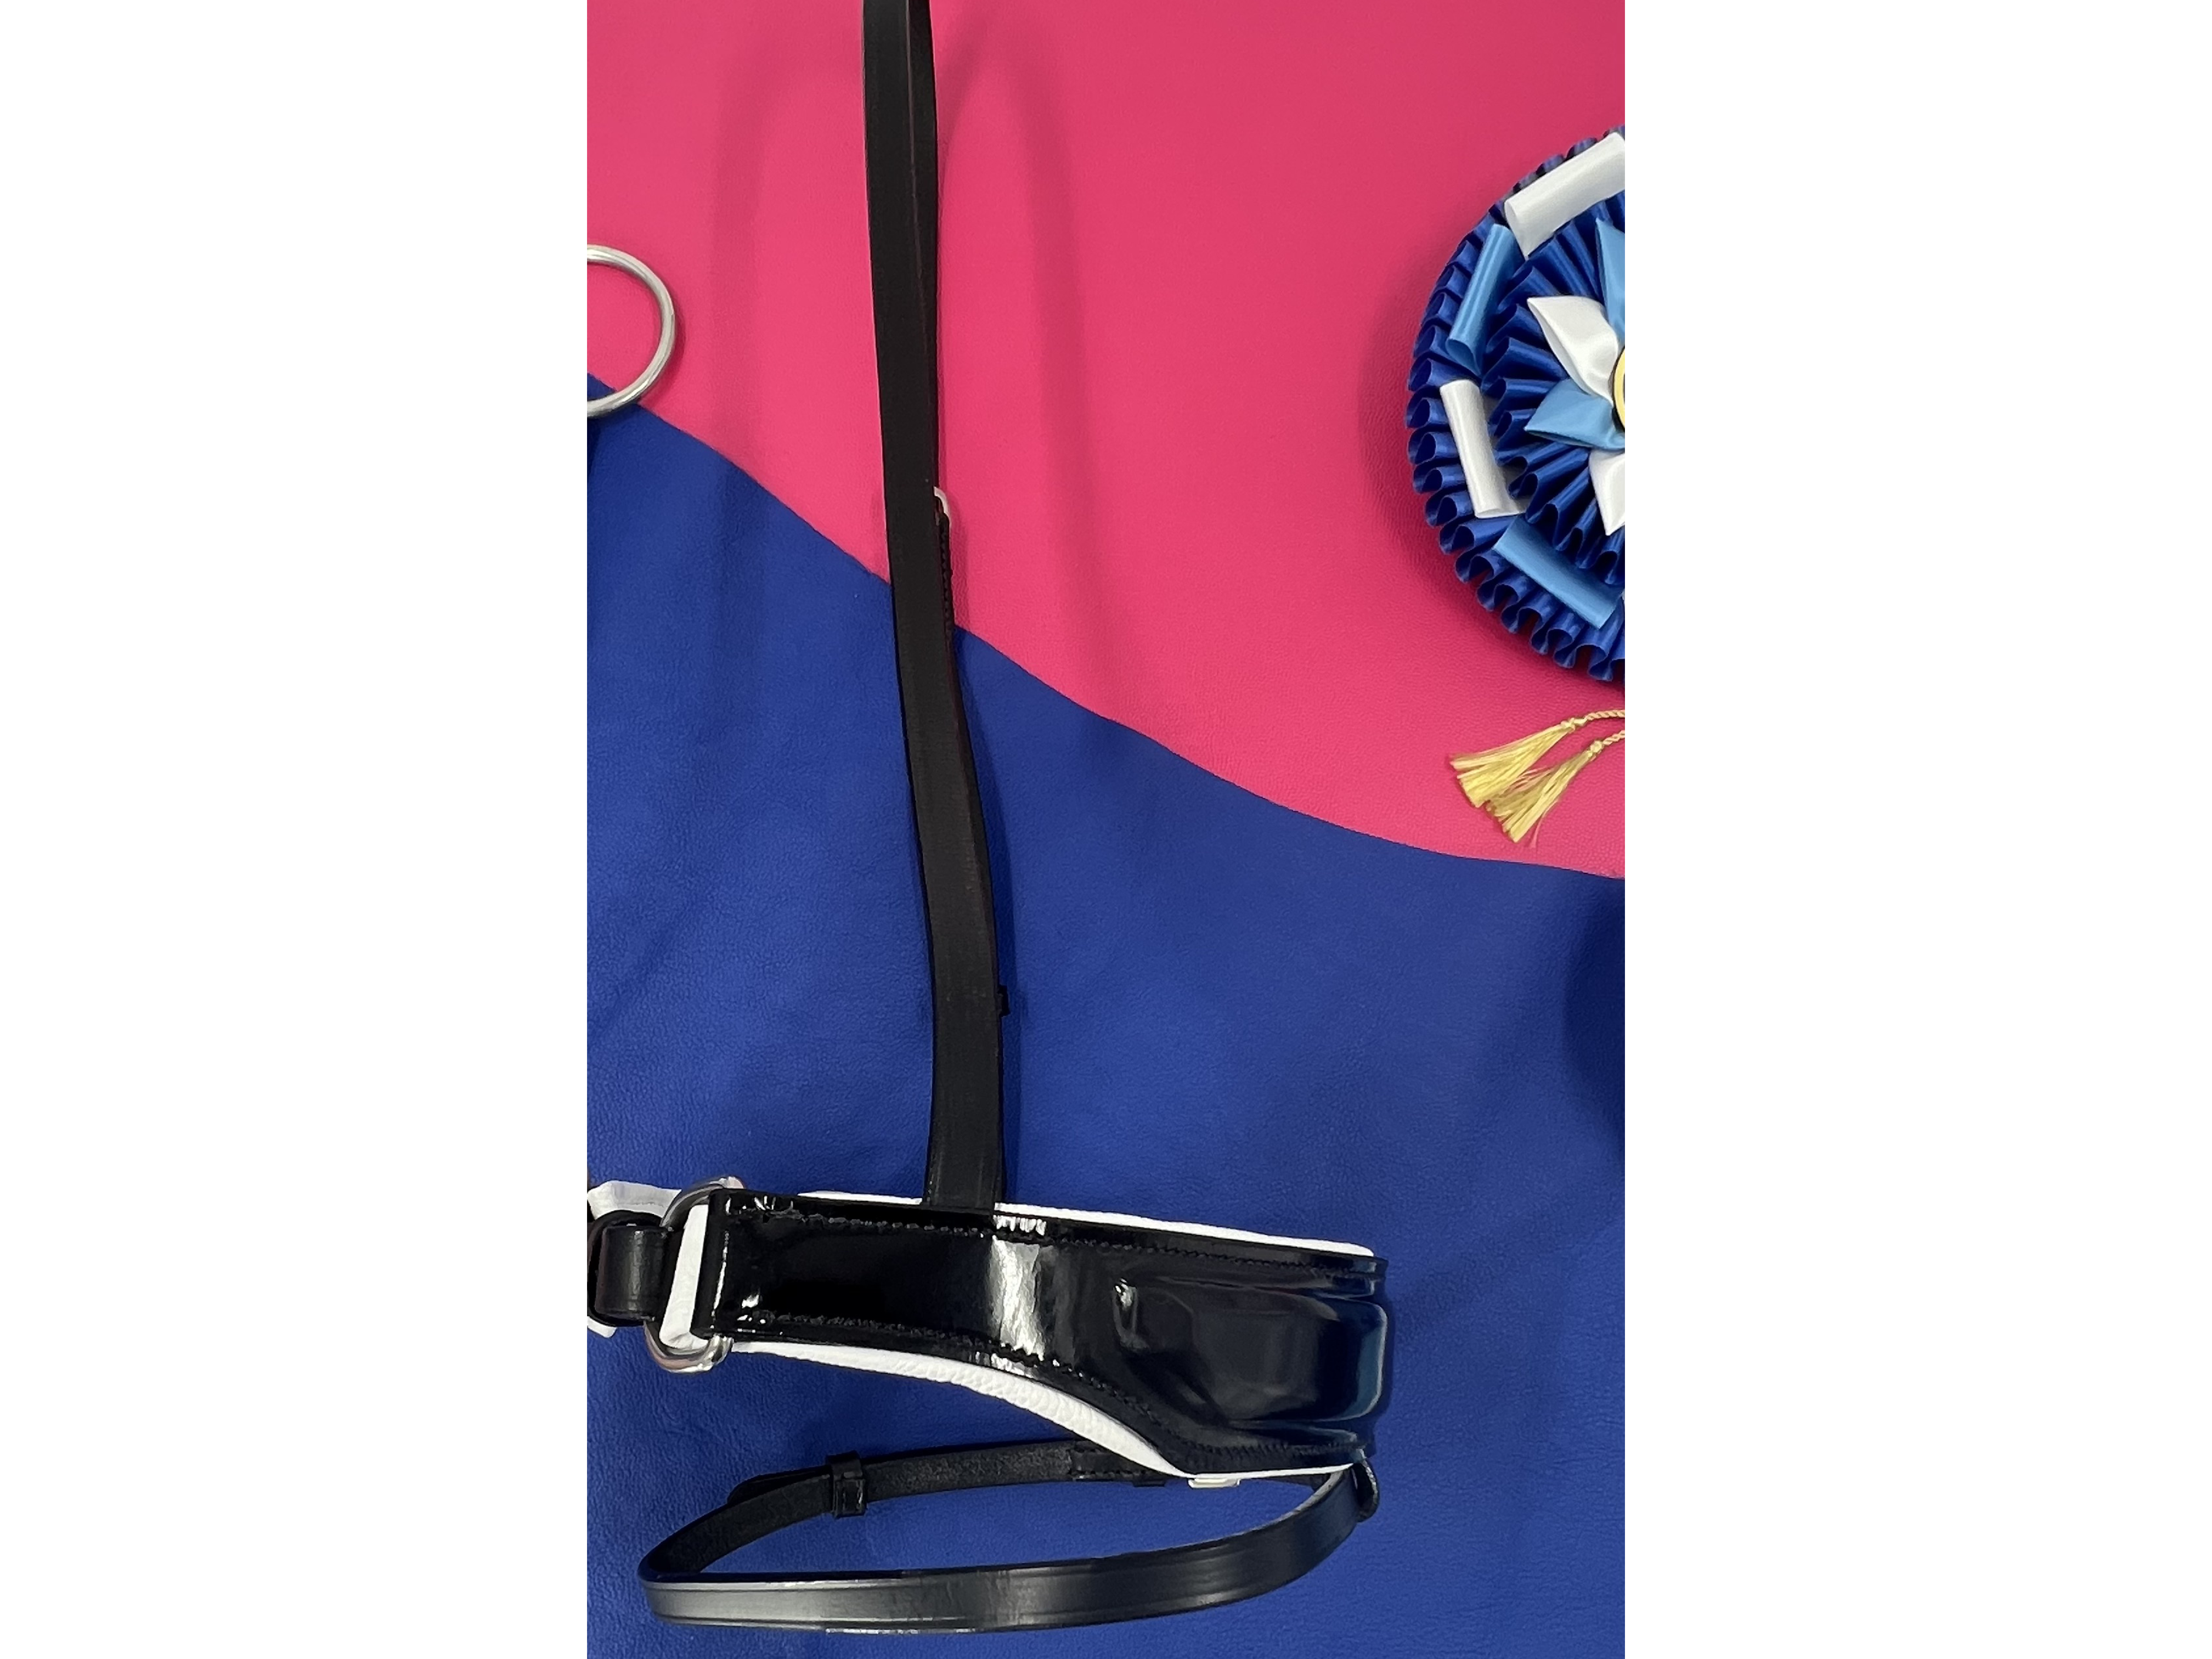 Wide, Patent Leather Anatomical Crank Noseband with White Padding